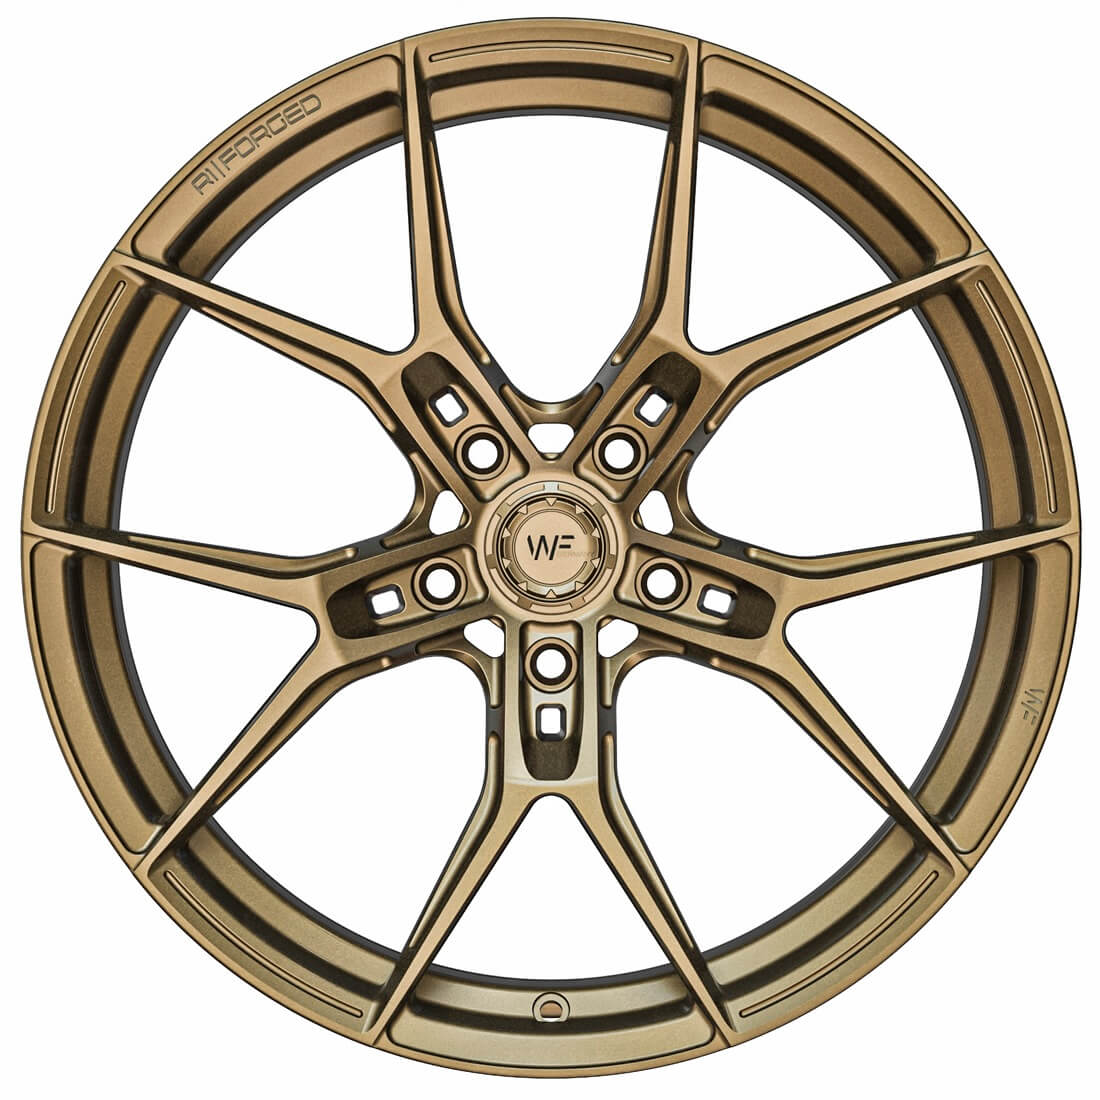 WF RACE.ONE | FORGED - SATIN BRONZE 9.0x19 ET44 5x112 FC - TTRS/RS3 Lim. Edition